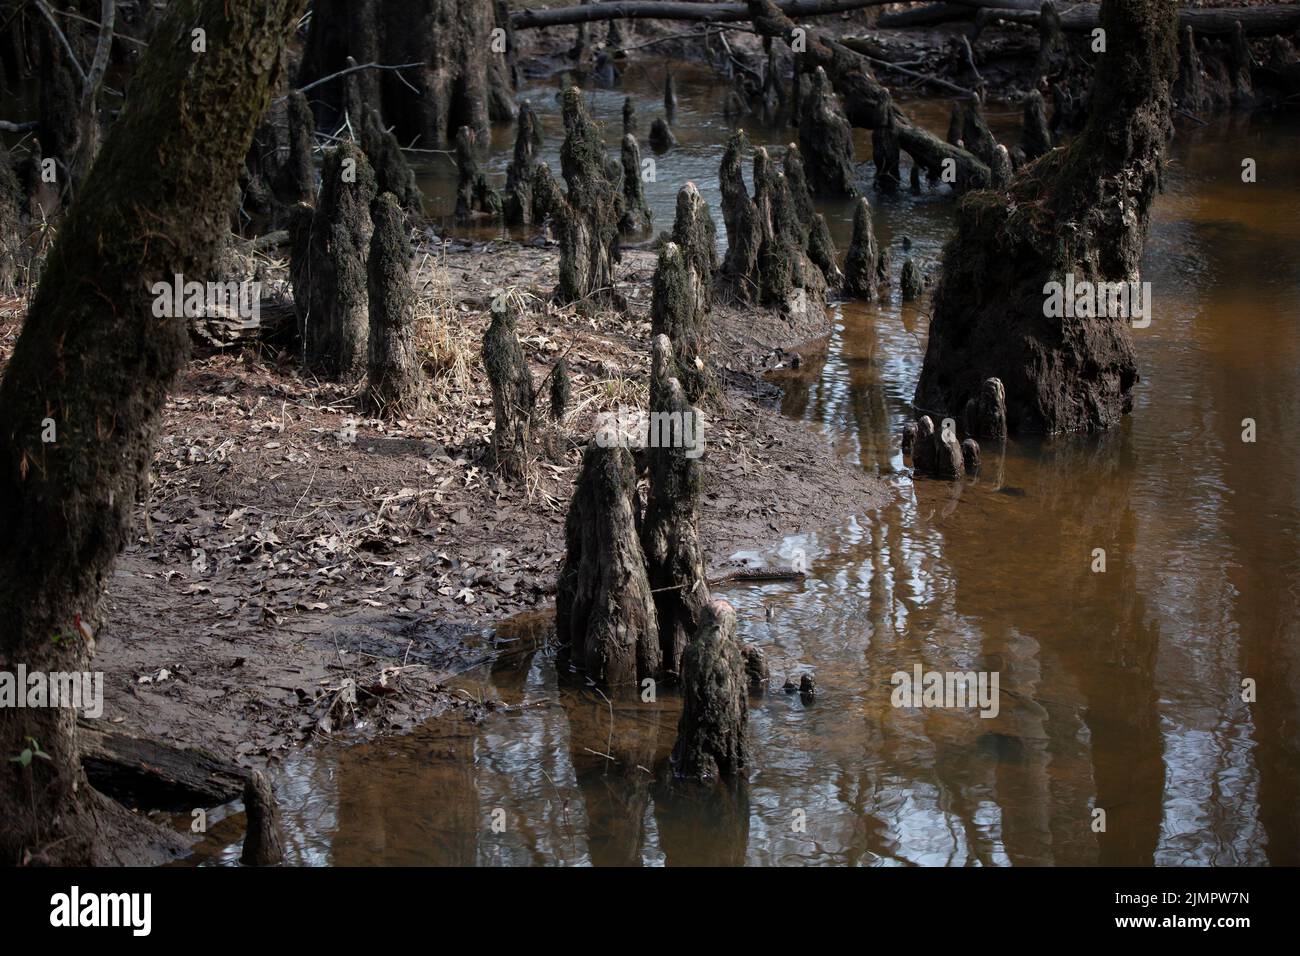 Cypress knees in shallow water near a muddy shore Stock Photo